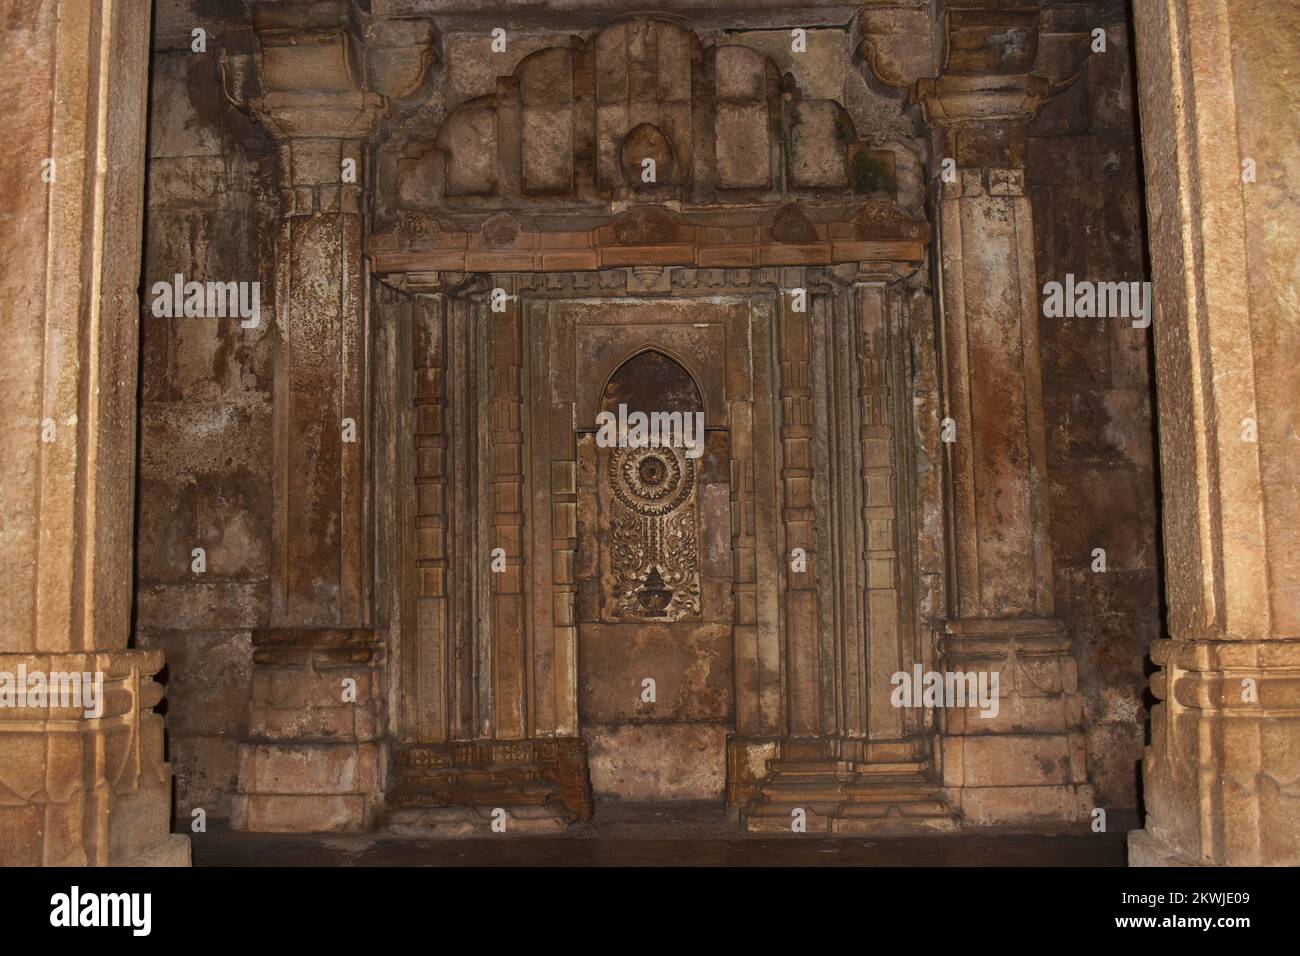 Shaher ki Masjid, interior stone carvings, Place of Imam the leader, built by Sultan Mahmud Begada 15th - 16th century. A UNESCO World Heritage Site, Stock Photo